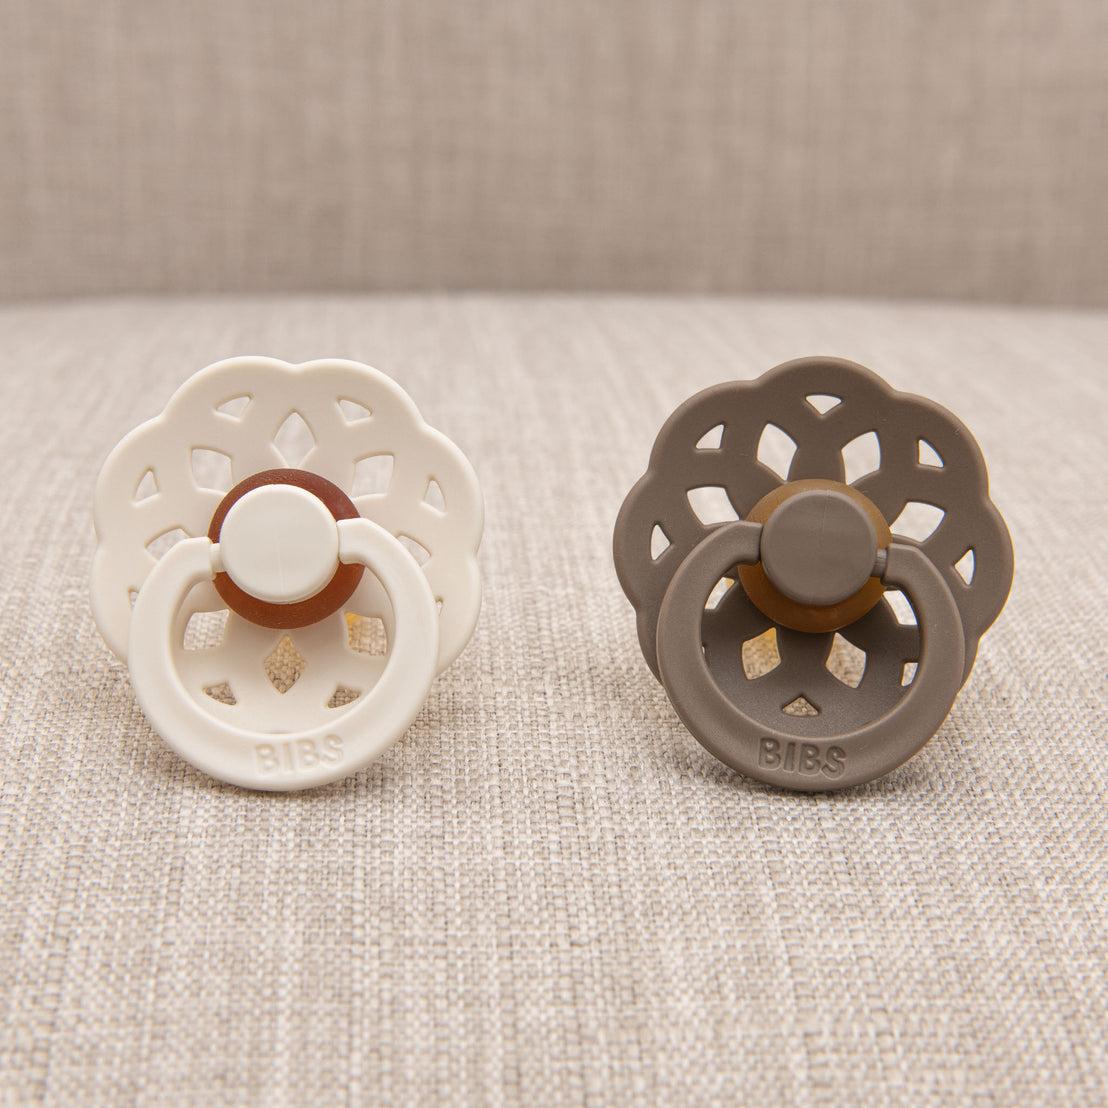 Two Madeline pacifiers, one ivory and one dark oak, rest on a textured gray fabric surface.